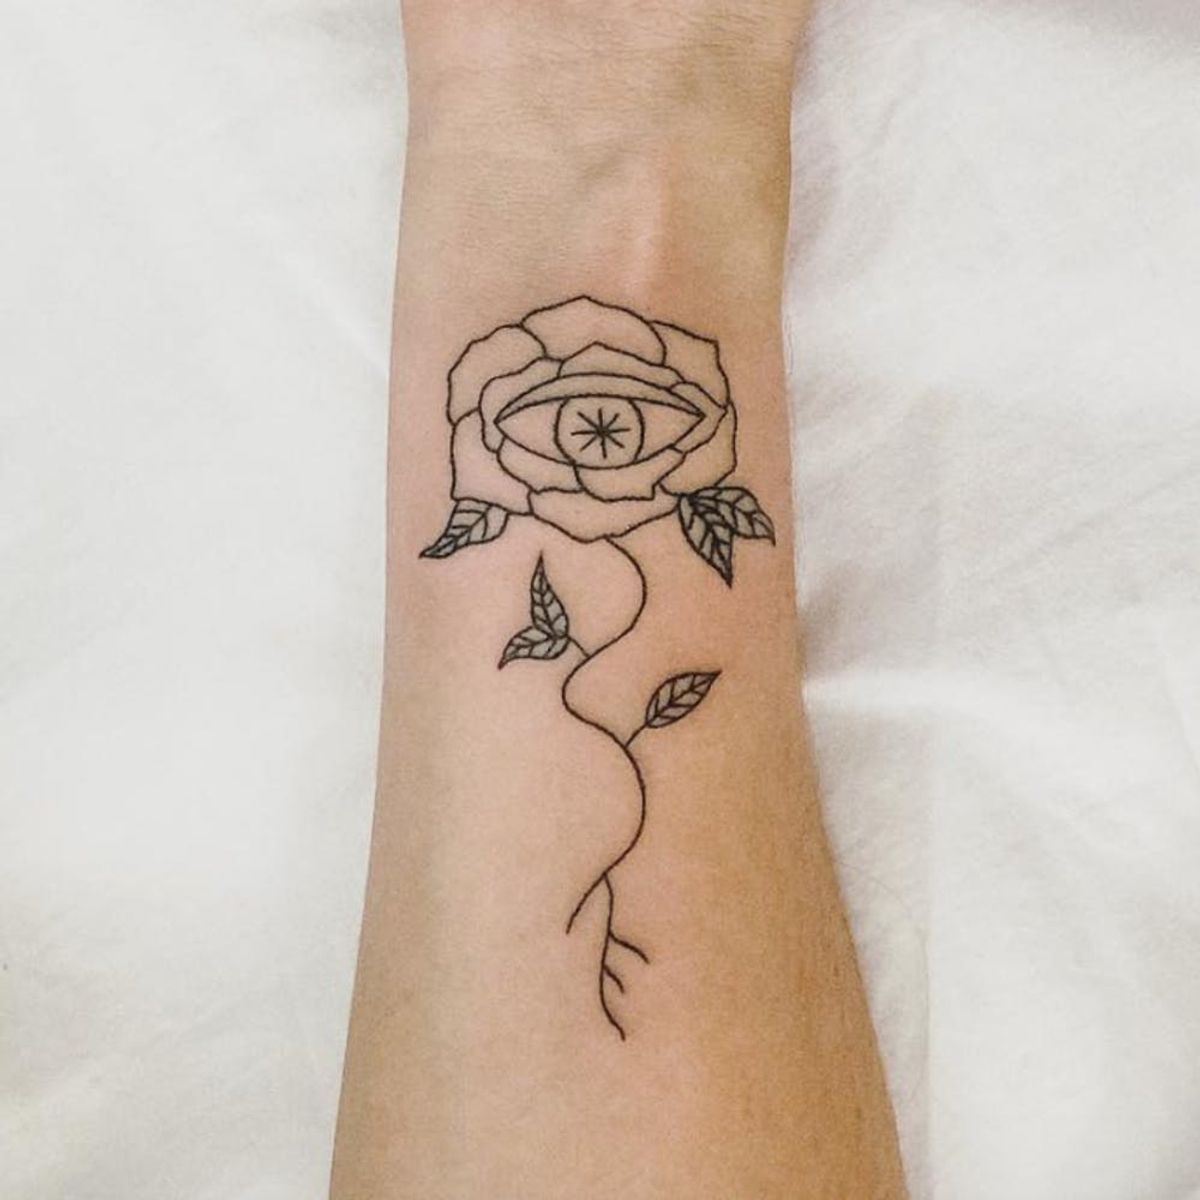 Soul Tattoos Are the Newest Tattoo Trend to Take Instagram by Storm